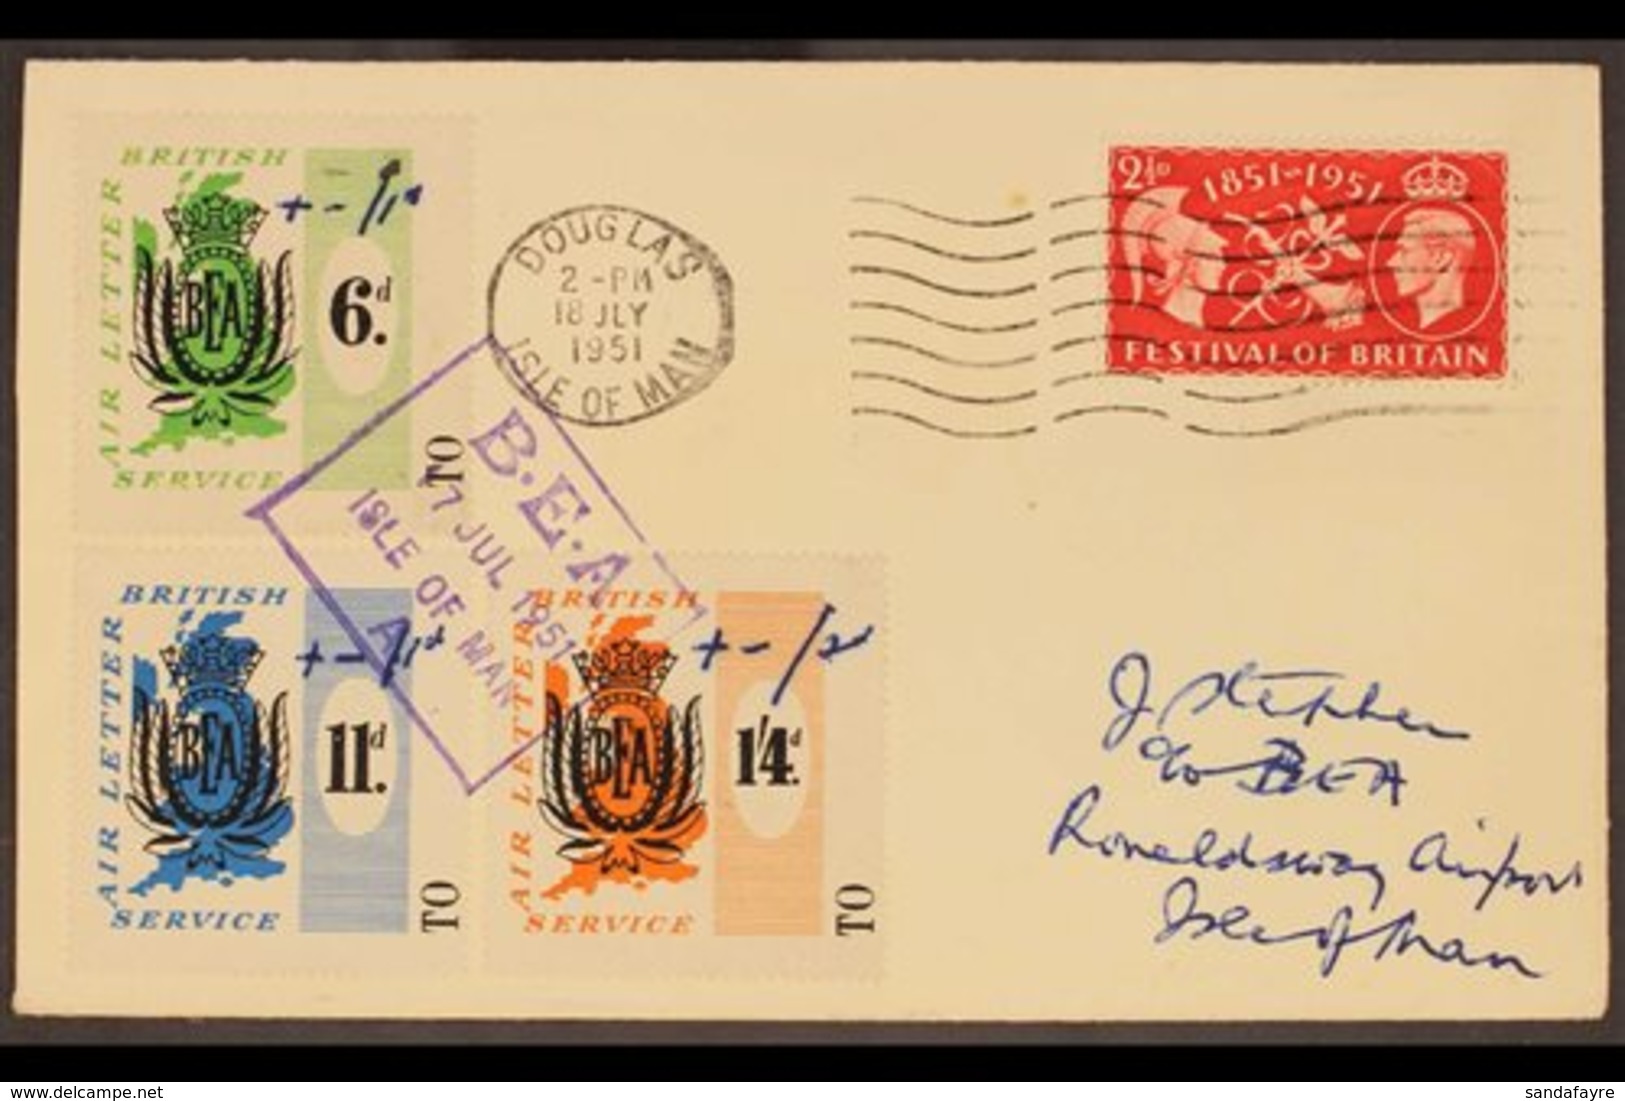 B.E.A. AIR LETTER SCARCE LOCAL SURCHARGES 1951 (17 July) Cover From Douglas To Ronaldsway Bearing GB 2½d Festival Plus 6 - Non Classés